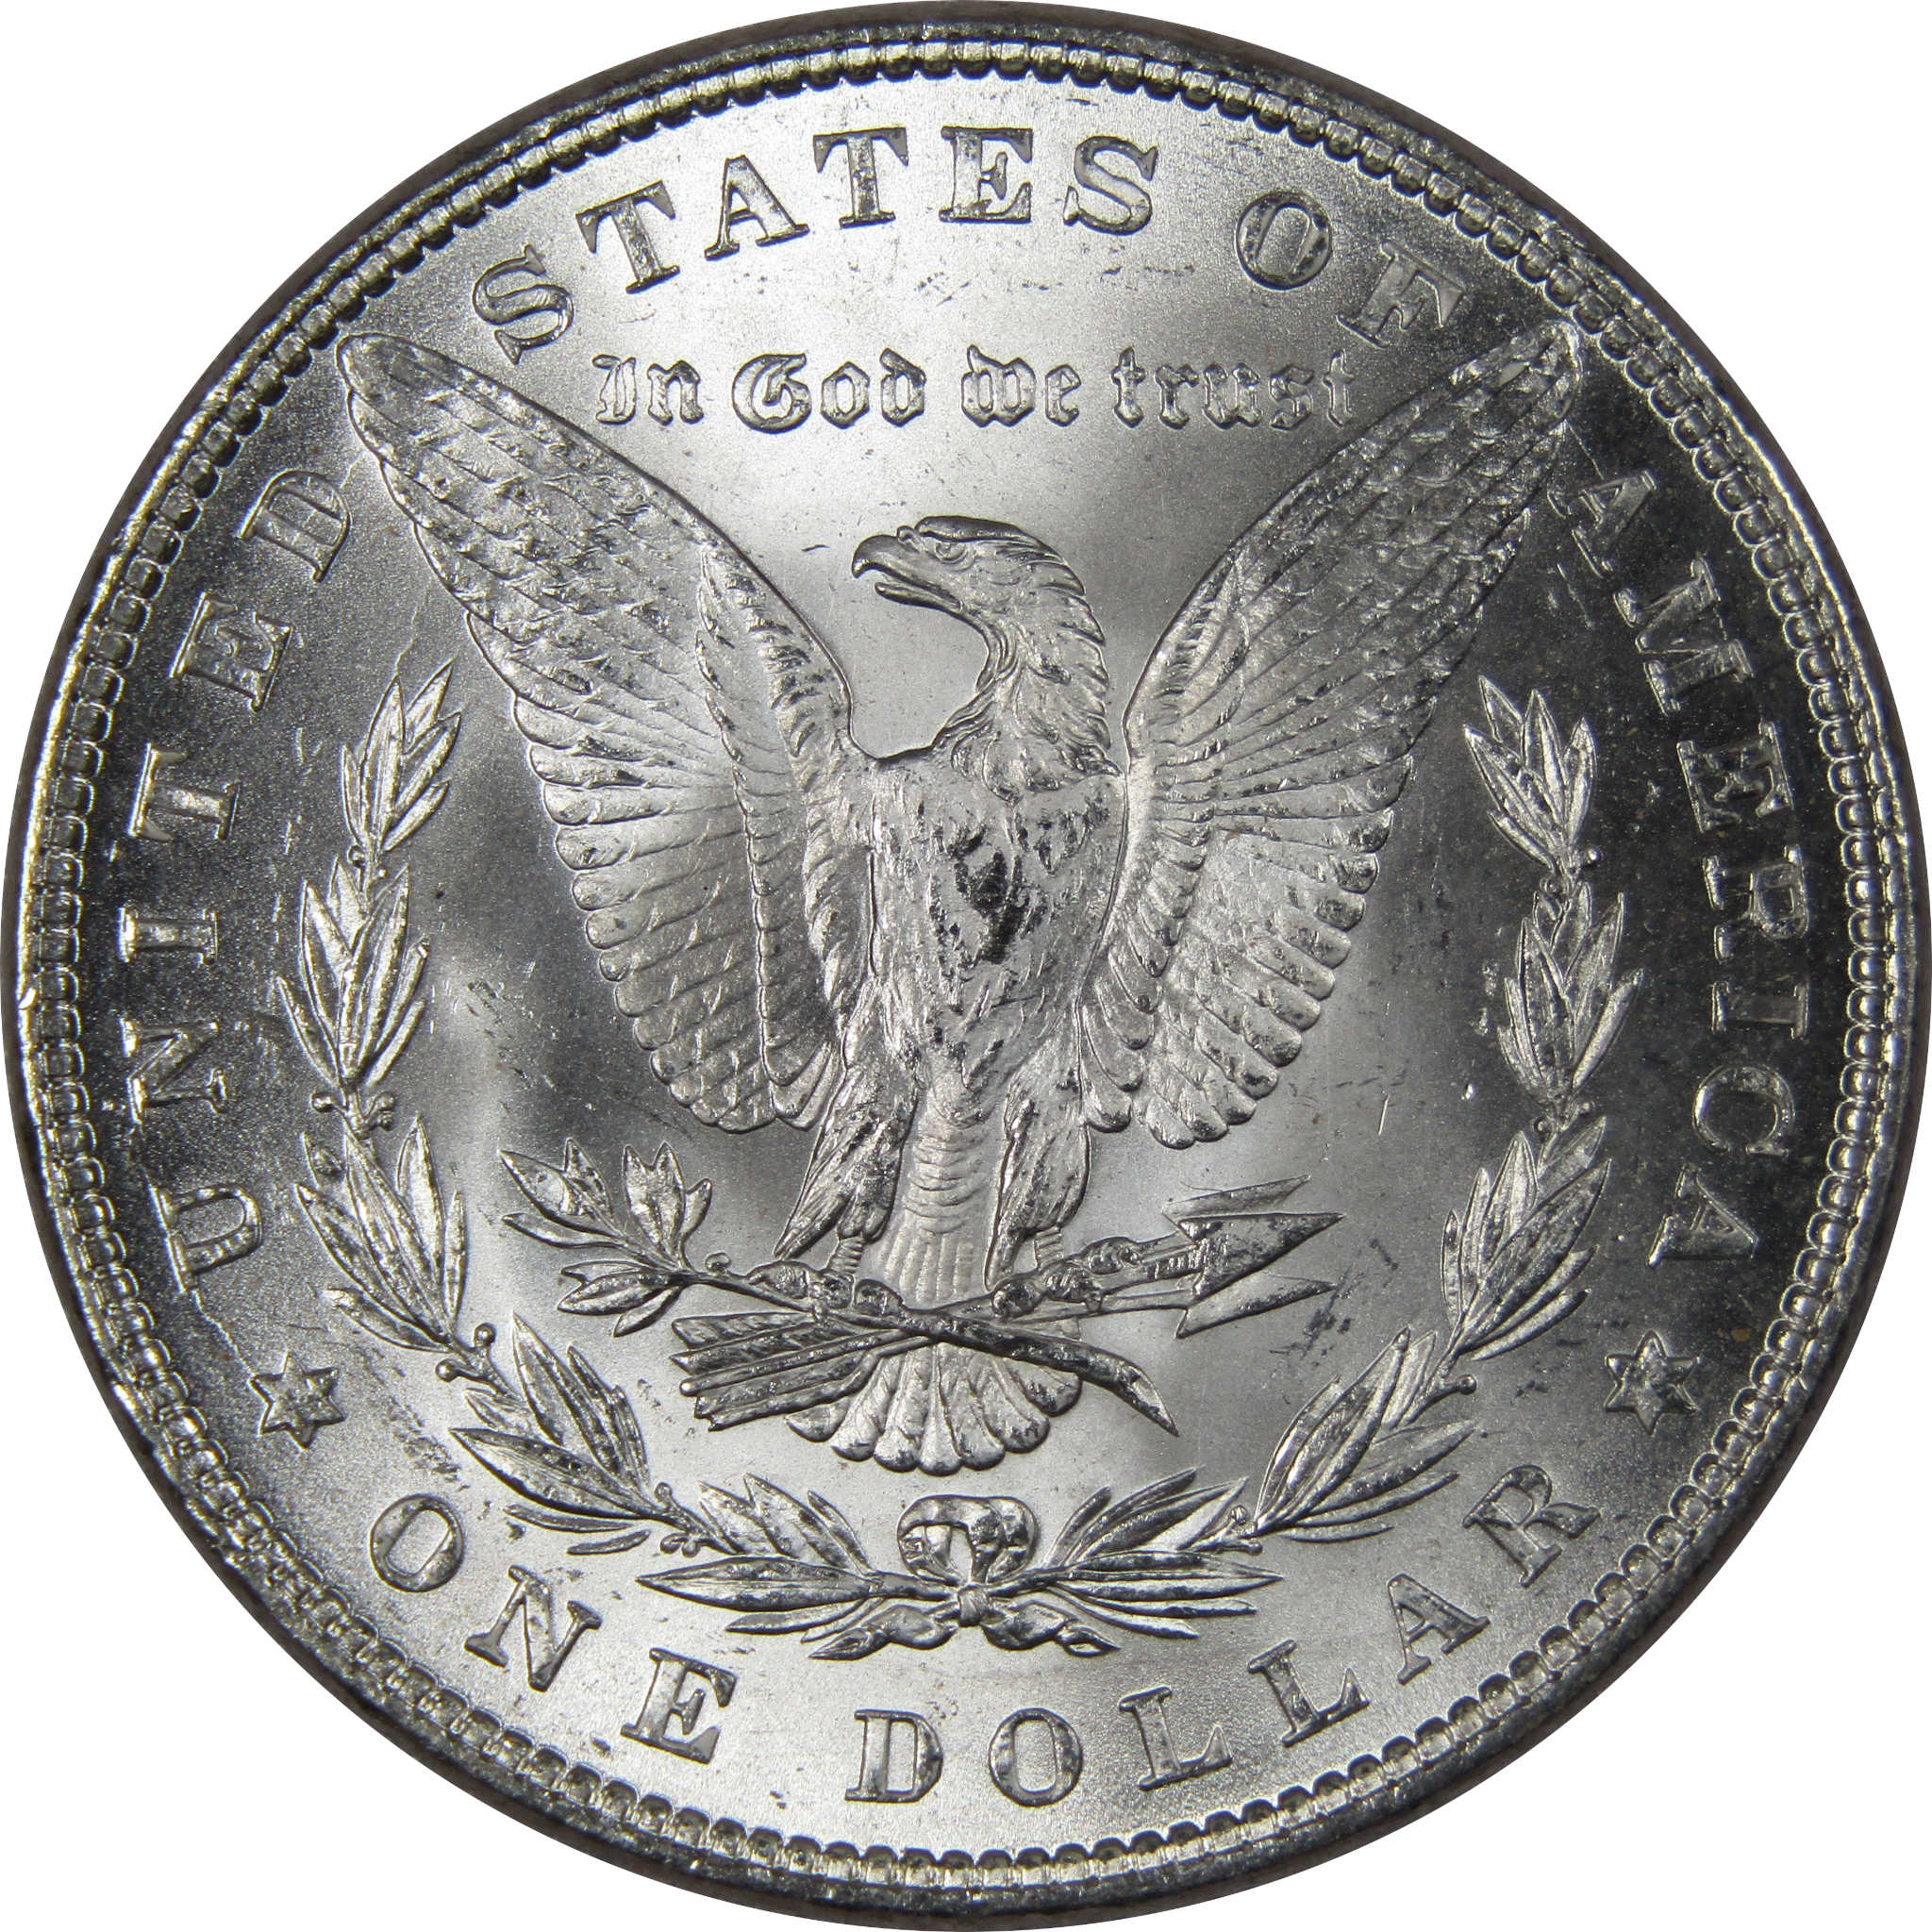 1882 Morgan Dollar BU Uncirculated Mint State 90% Silver SKU:IPC9661 - Morgan coin - Morgan silver dollar - Morgan silver dollar for sale - Profile Coins &amp; Collectibles